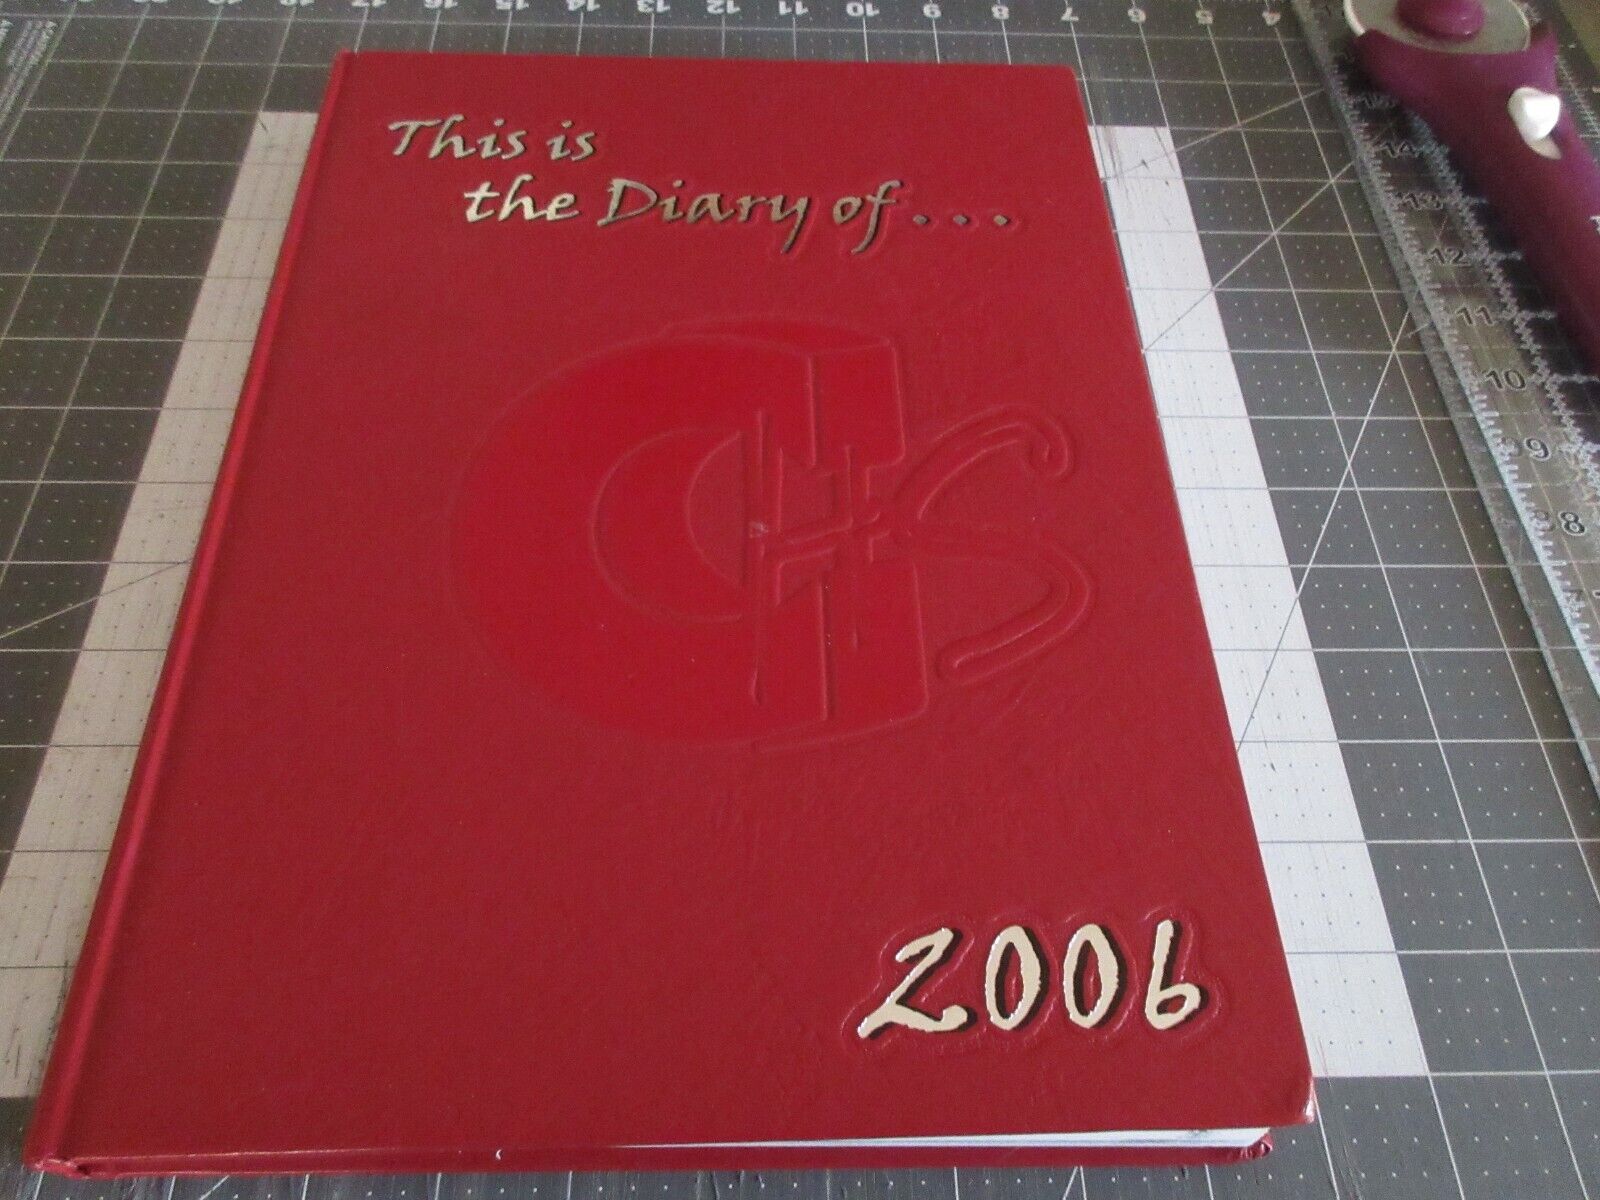 2006 CHESHIRE HIGH SCHOOL YEARBOOK, Diary of, CHESHIRE CONNECTICUT